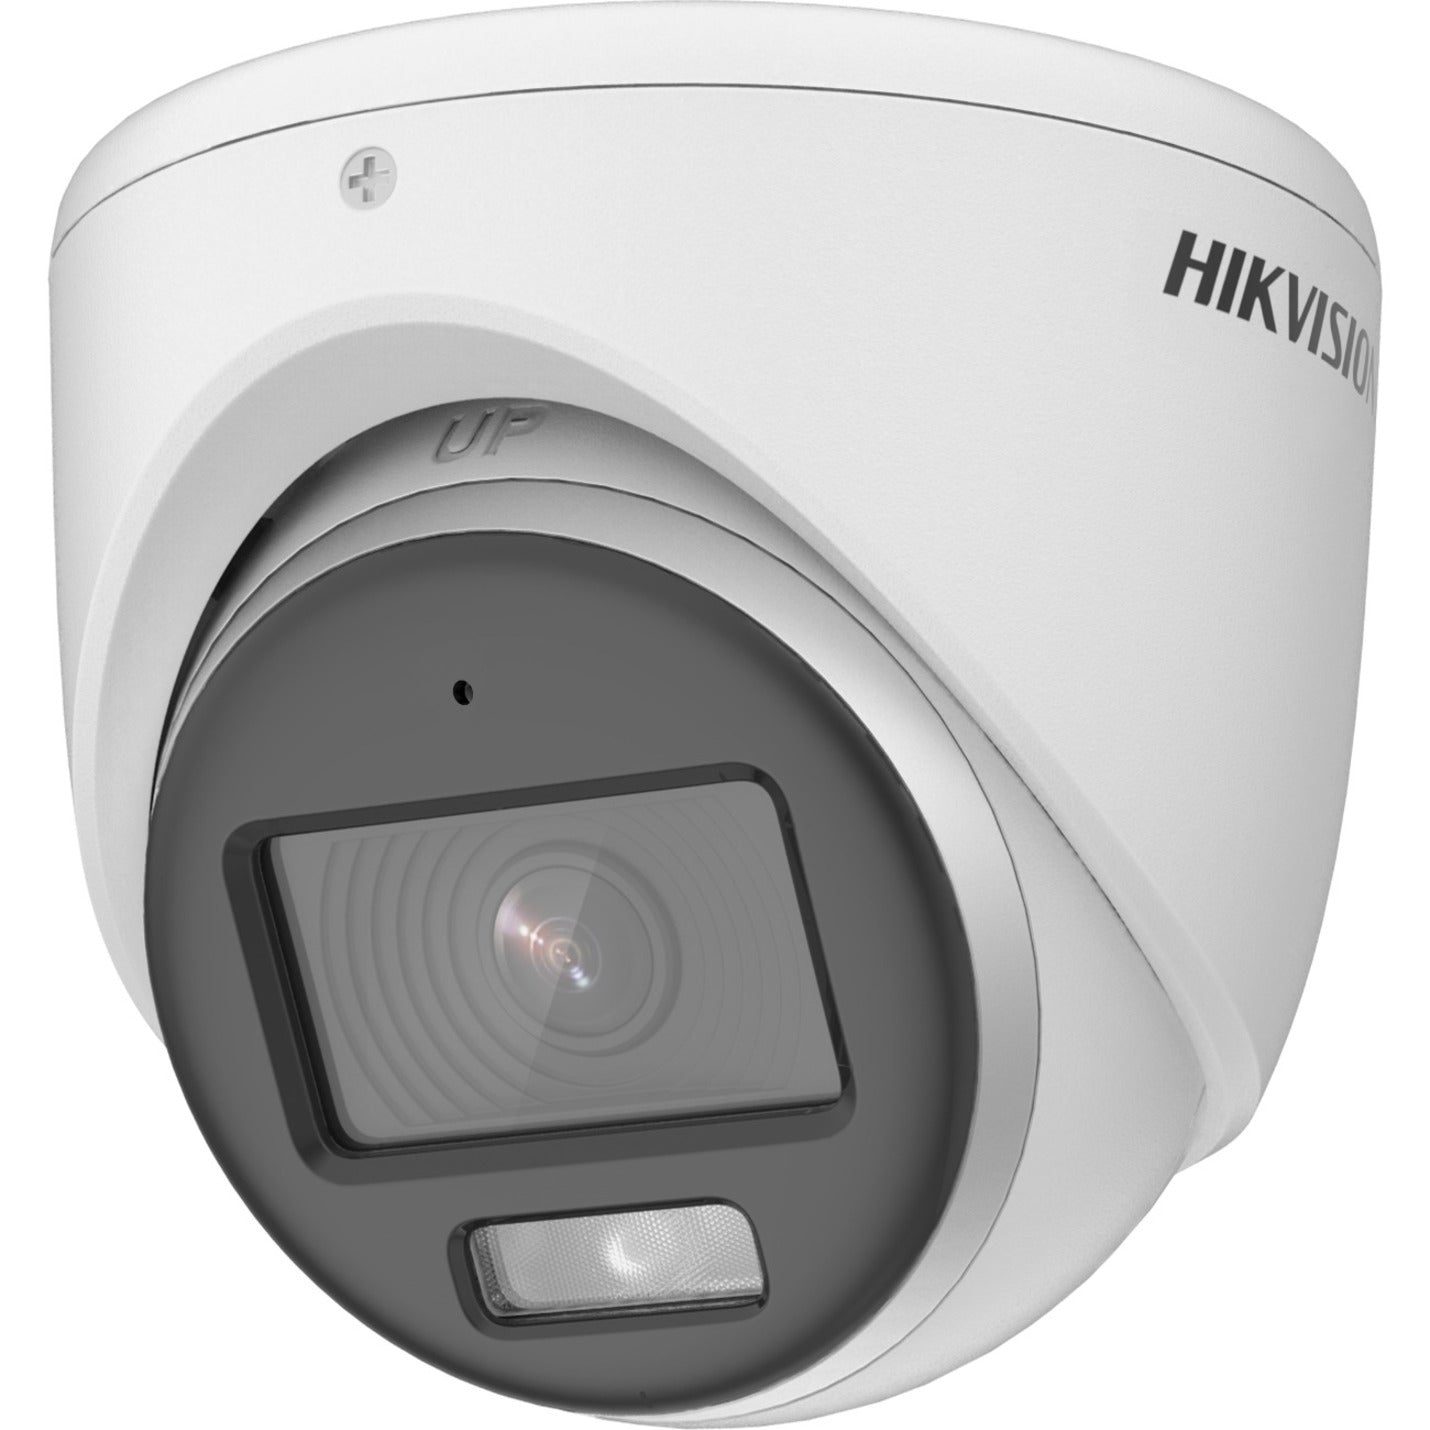 Hikvision DS-2CE70KF0T-MFS 3.6MM 3K ColorVu Audio Fixed Turret Camera, 5MP, Night Vision, IP67